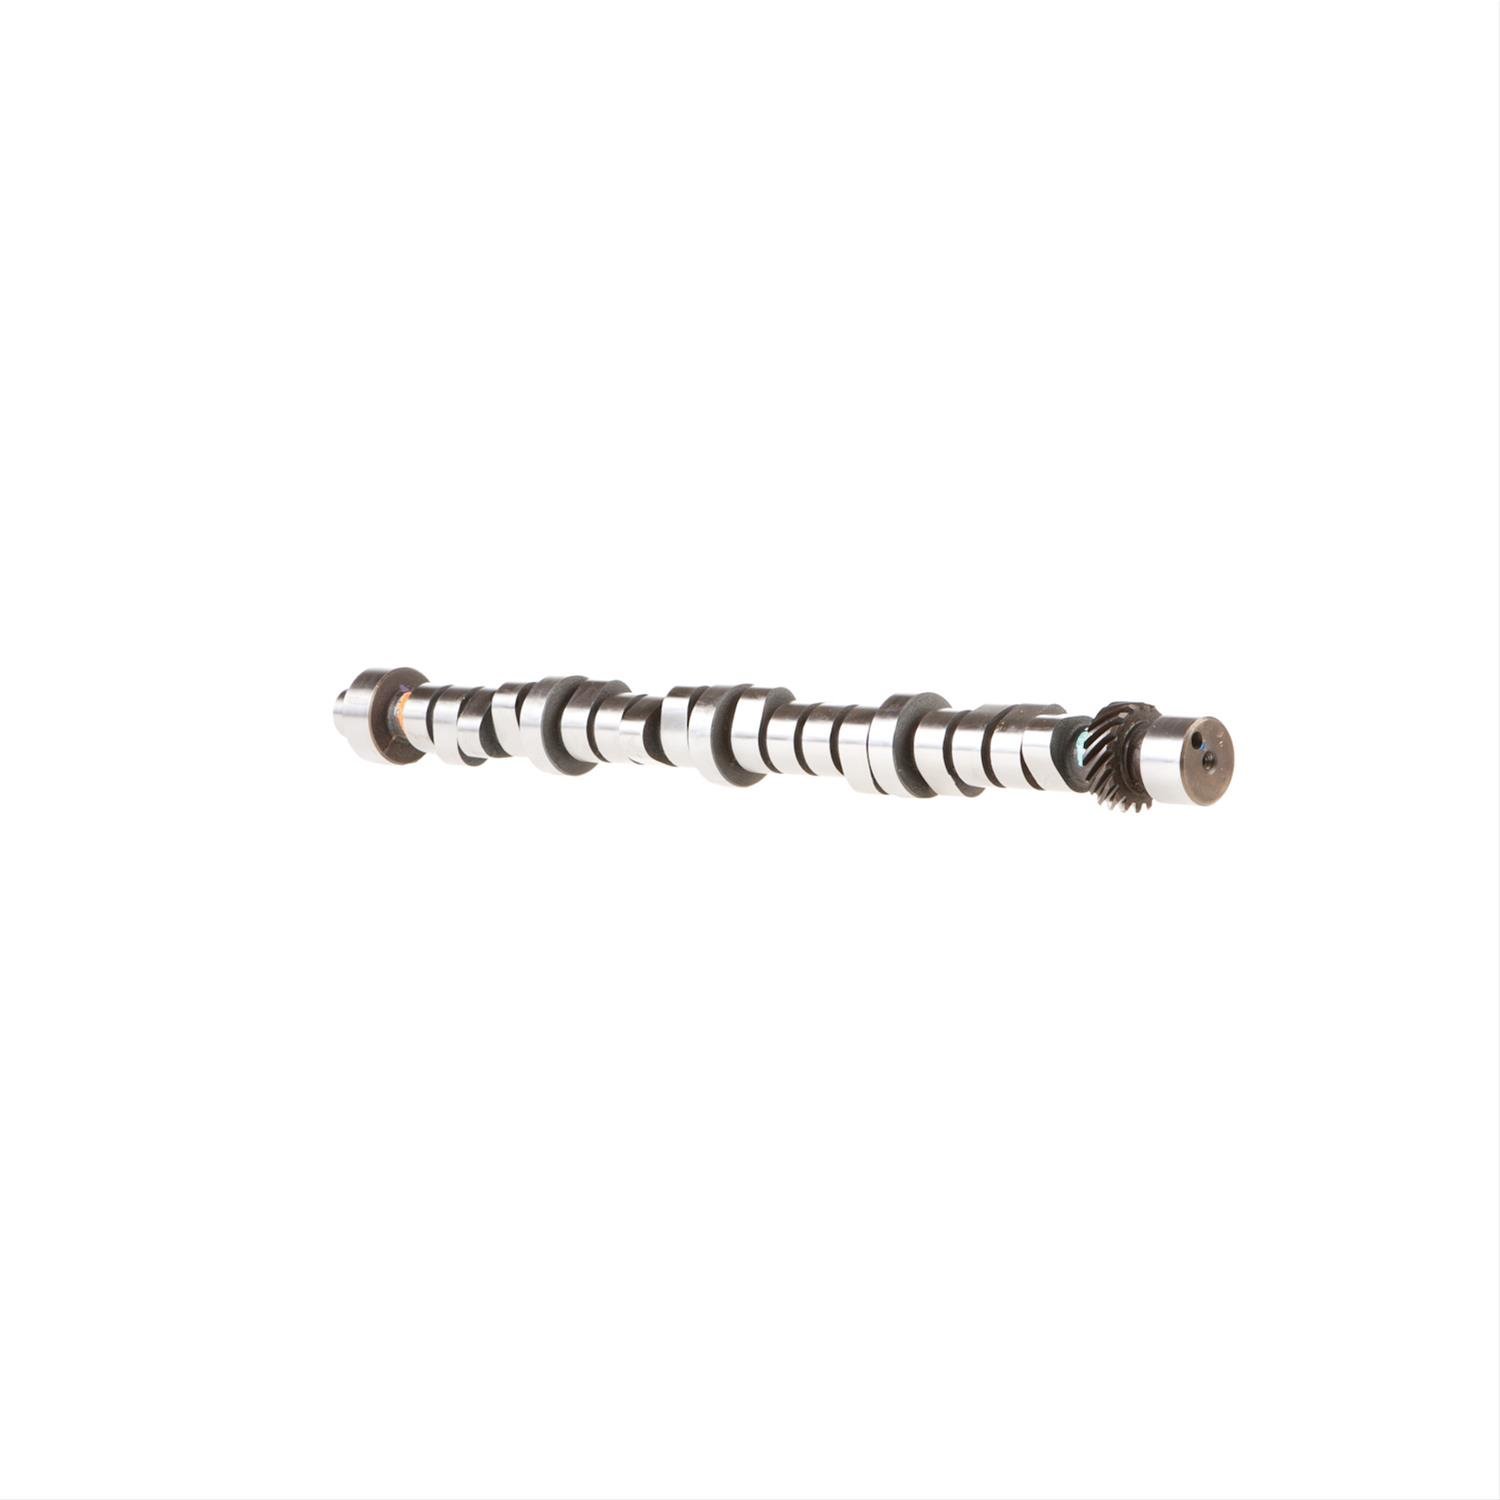 OEM Replacement Camshaft for Select 1992-1997 Dodge/Jeep Models with 5.2L, 5.9L Engines